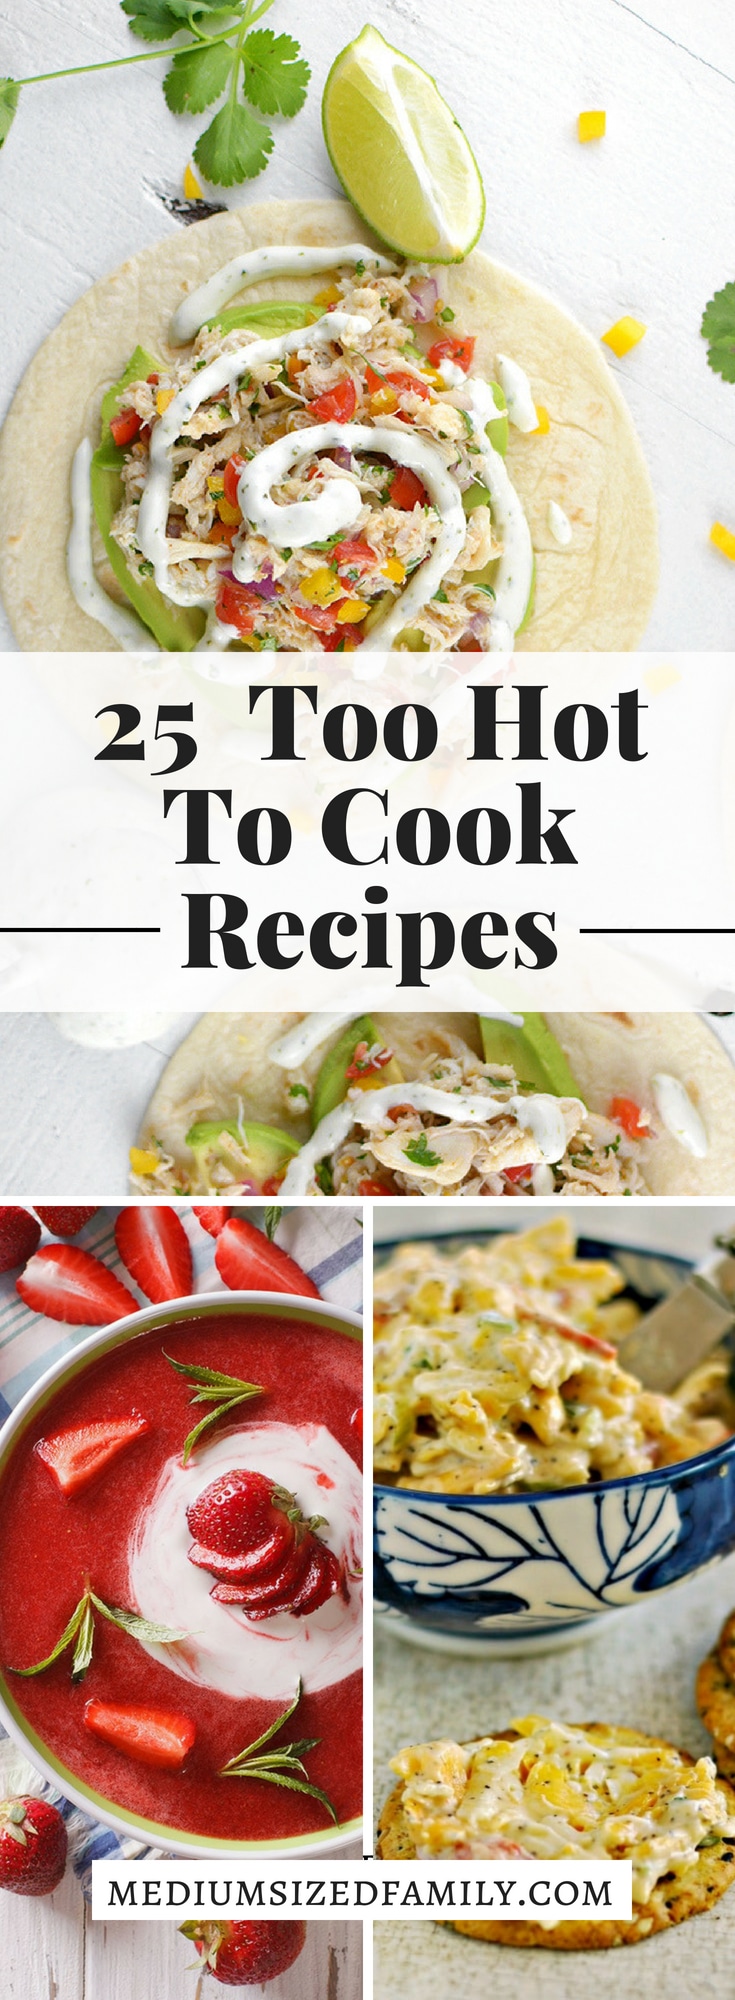 23 Microwave Meals You Can Make When It's Too Hot To Cook